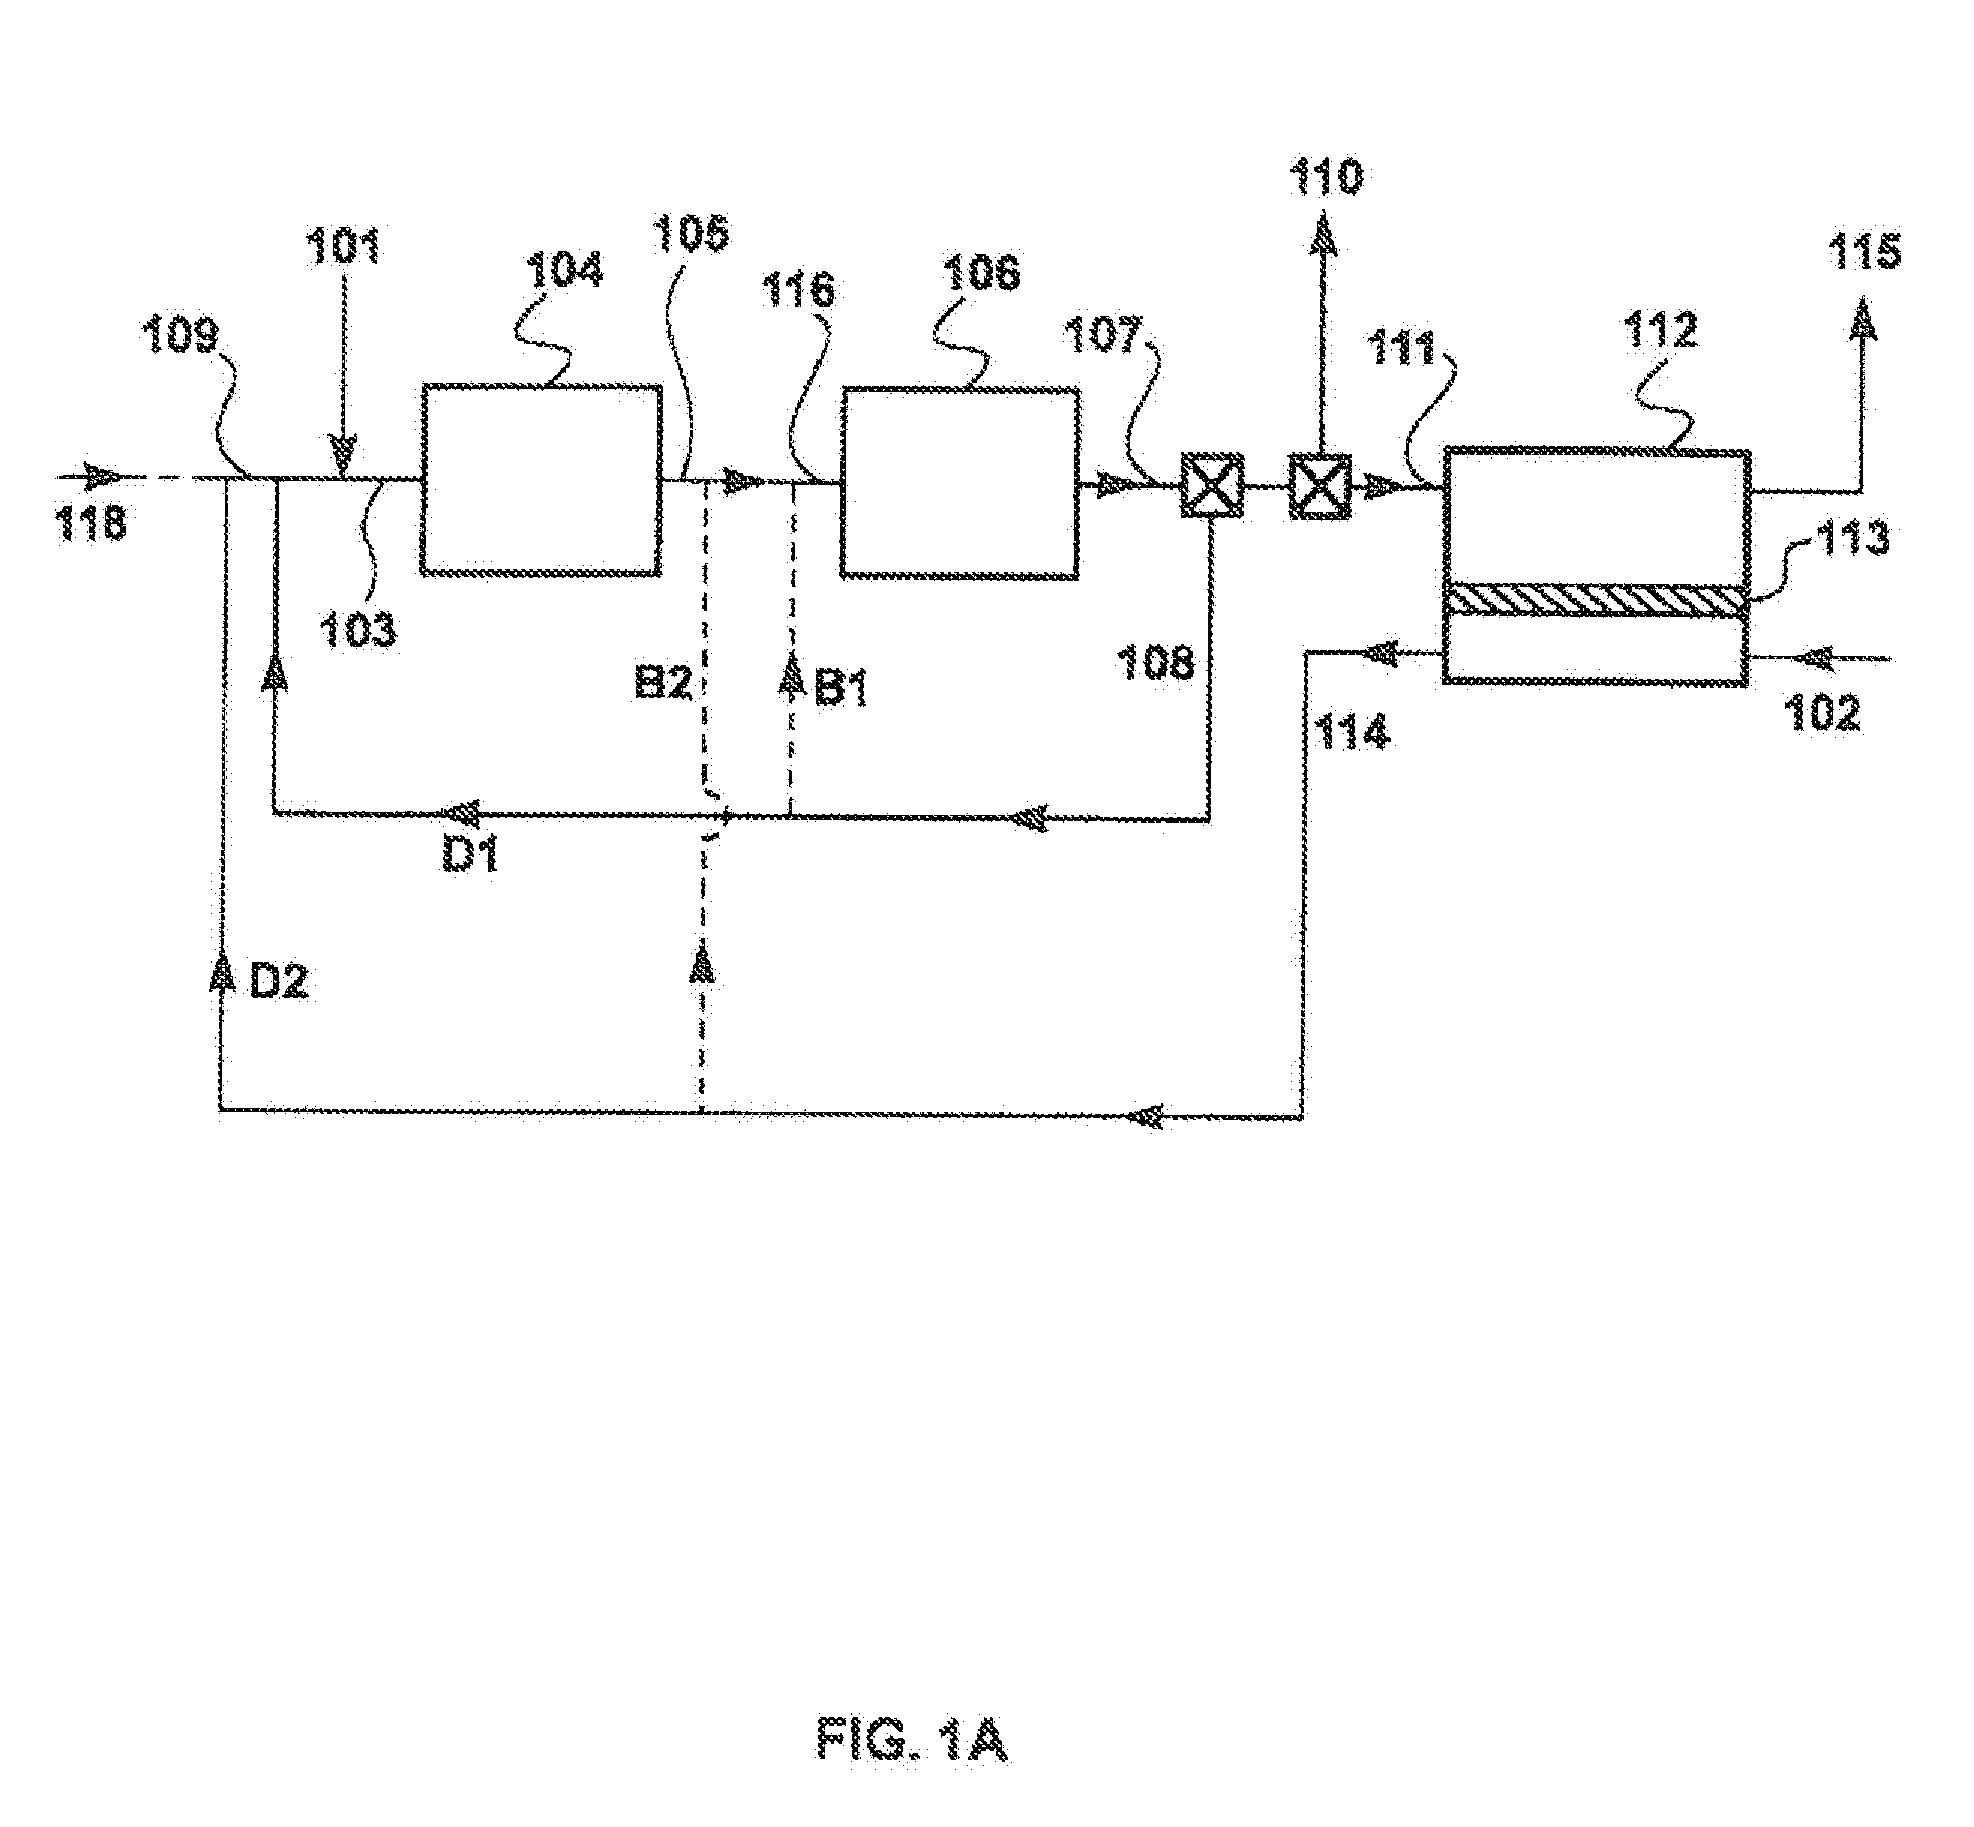 Membrane Technology for Use in a Power Generation Process